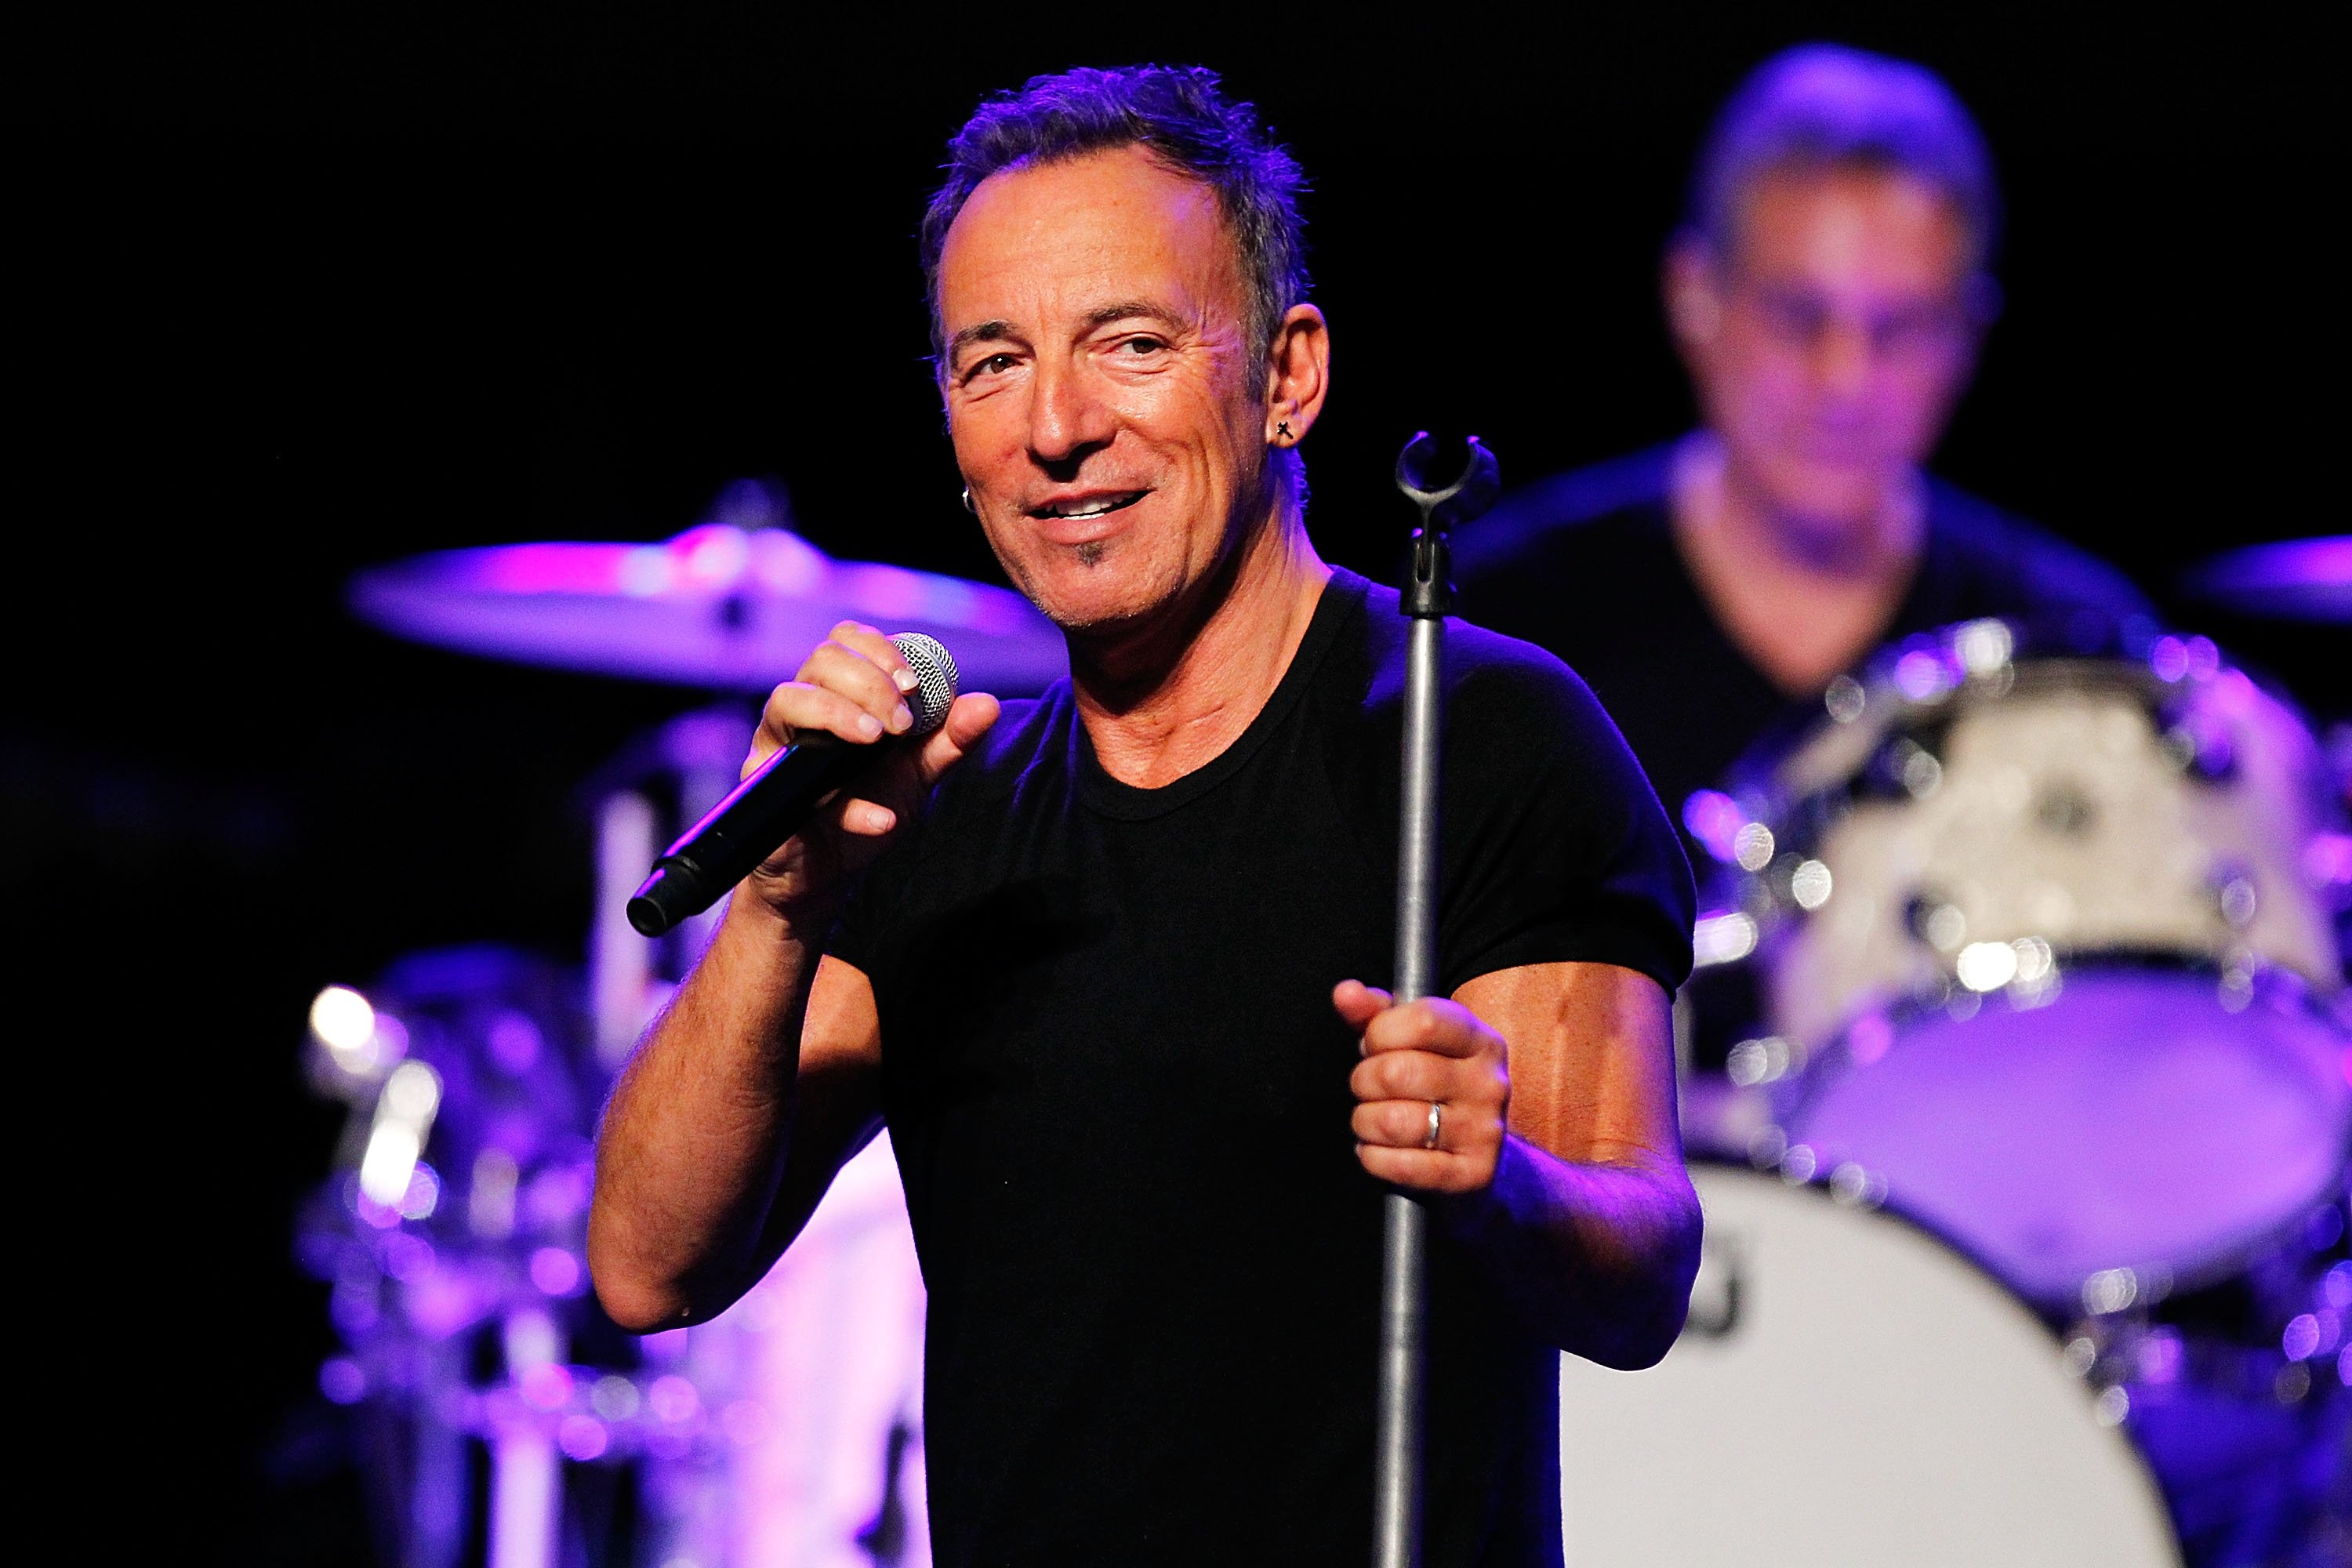 Bruce Springsteen performs at a sound check during a press conference at Perth Arena